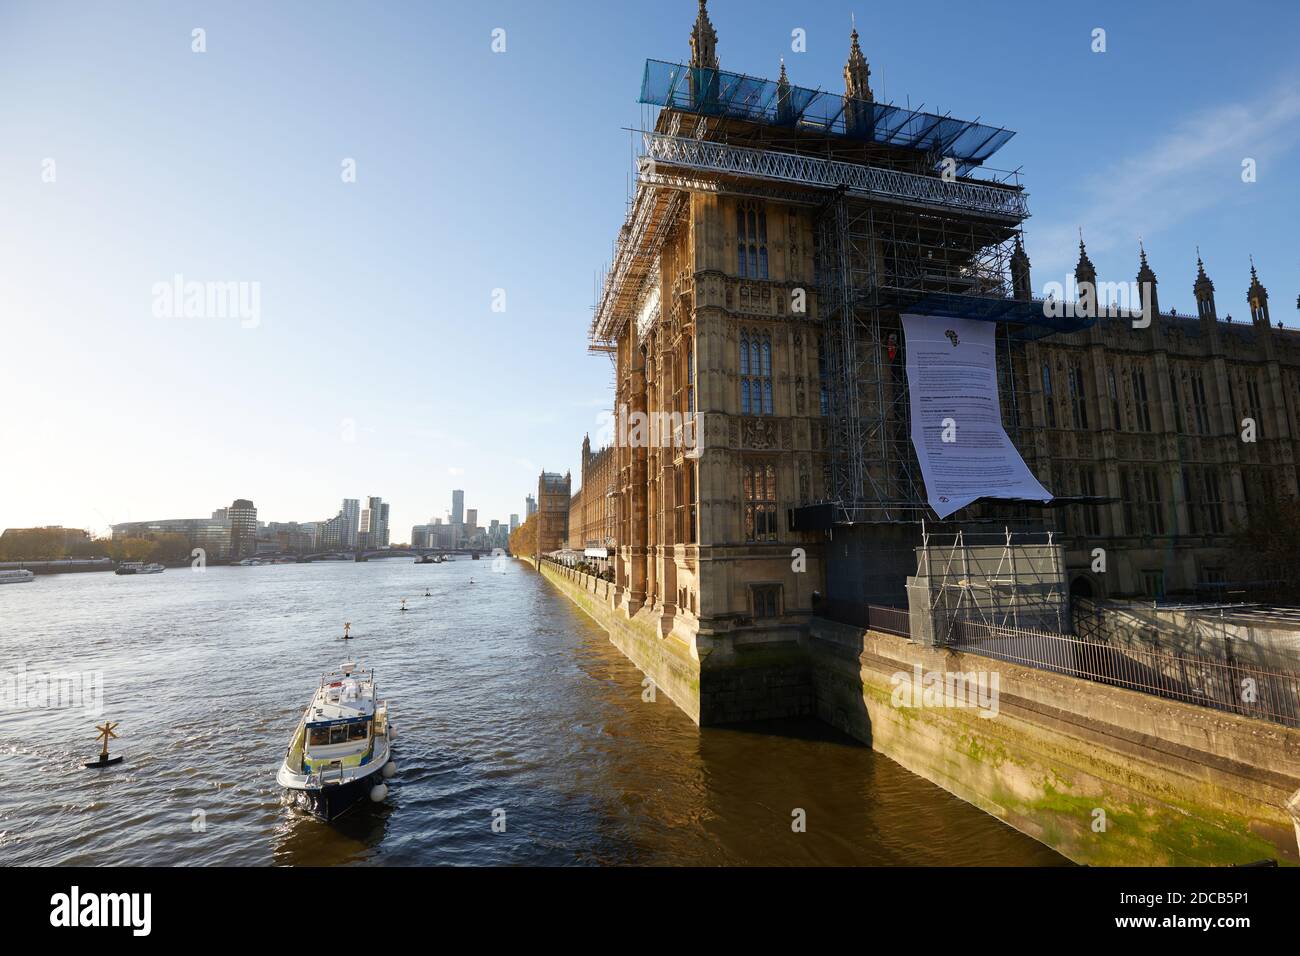 London, UK. - 12 Nov 2020: Police surround demonstrators from the protest group Africans Rising, who have unfurled a large banner on building works at the the side of the Houses of Parliament. Stock Photo